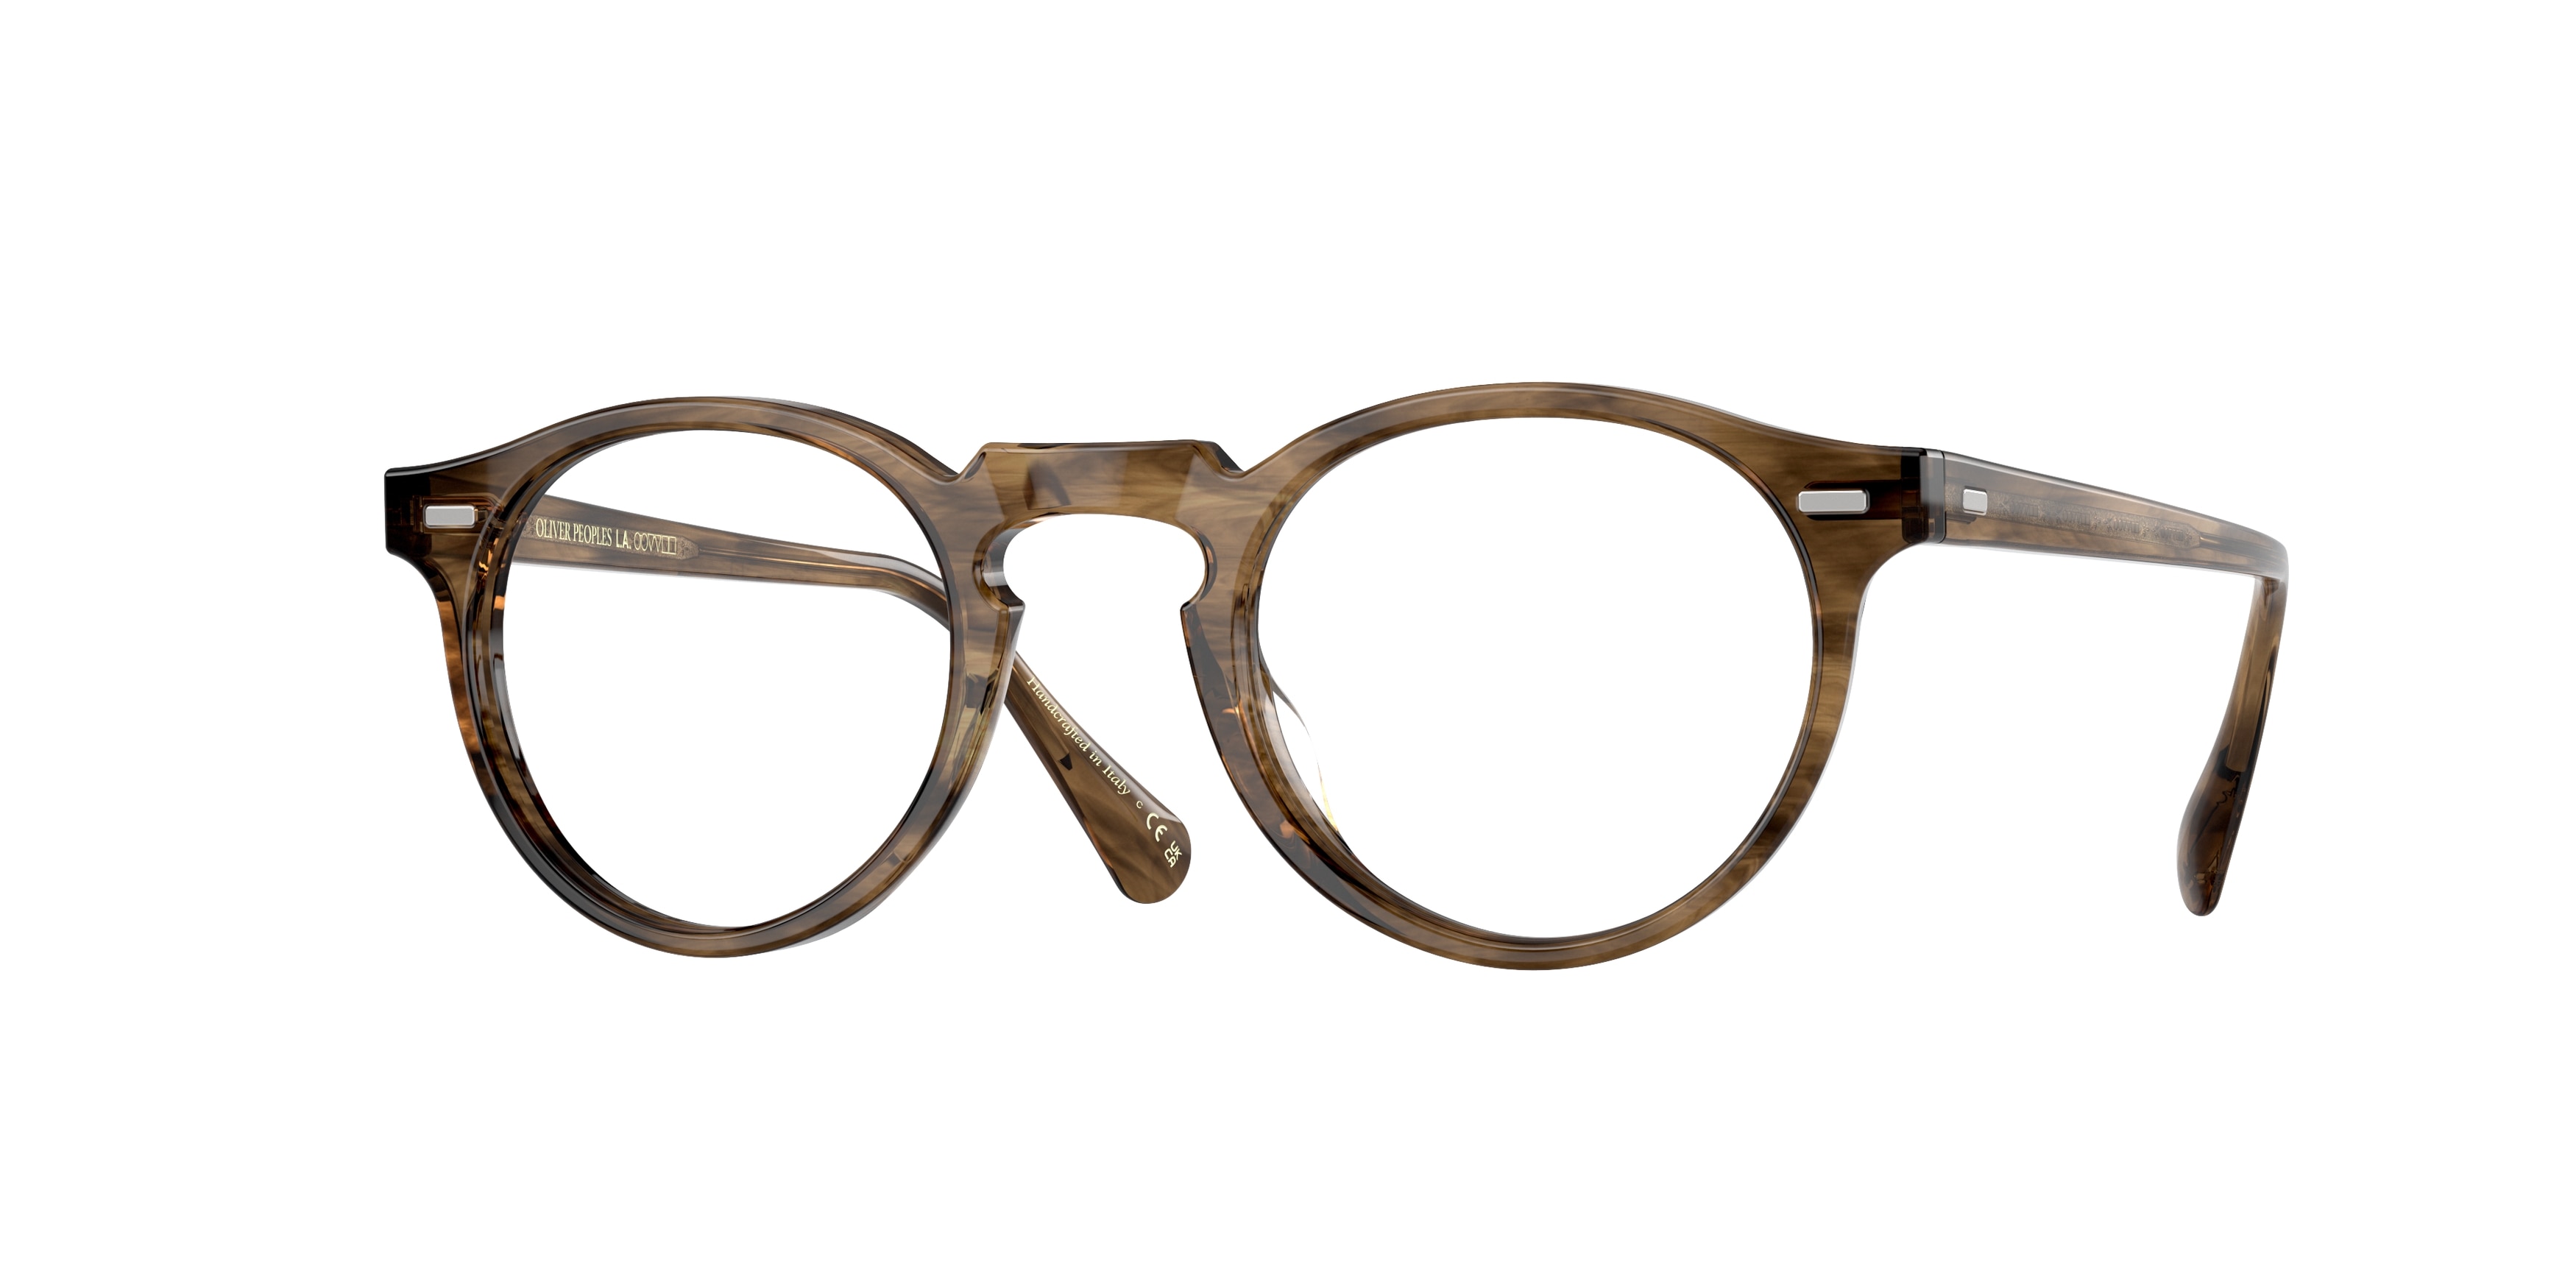 Oliver Peoples Gregory Peck OV5186 1689 Sepia Smoke